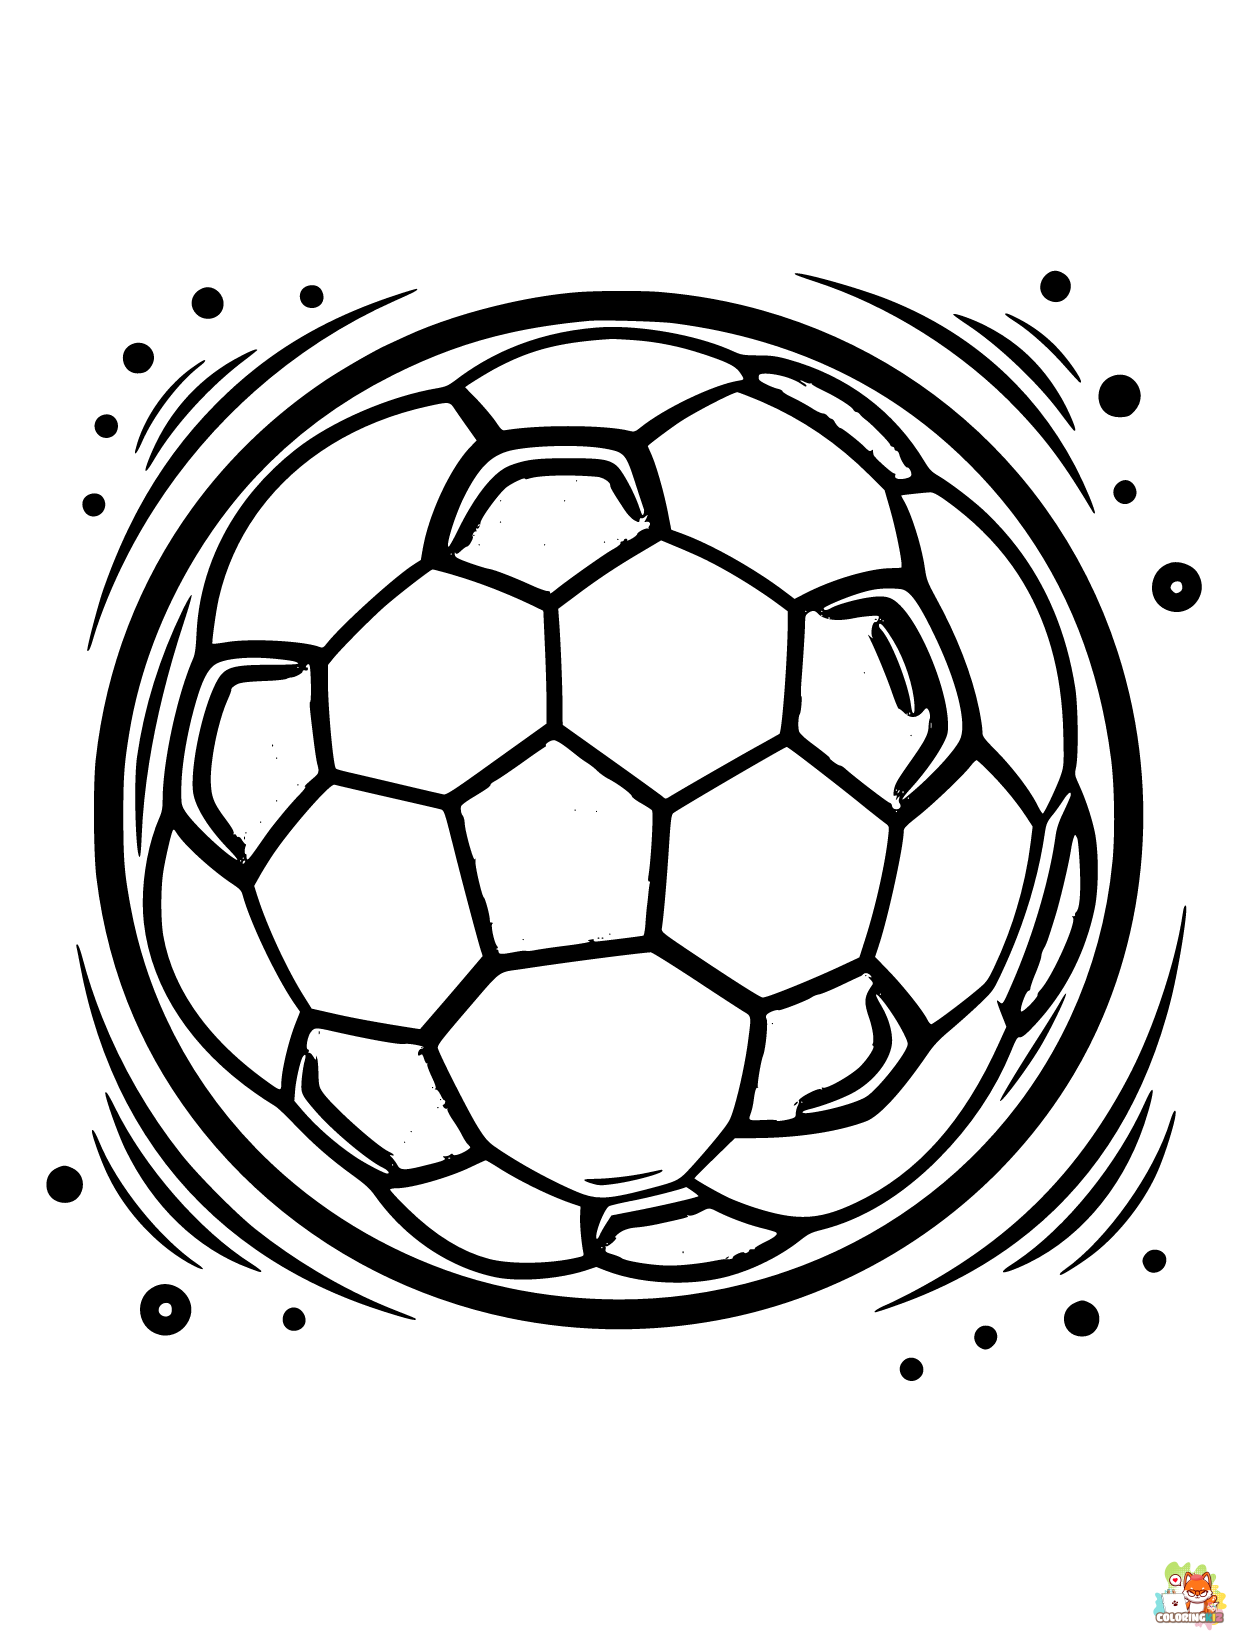 Free Soccer coloring pages for kids